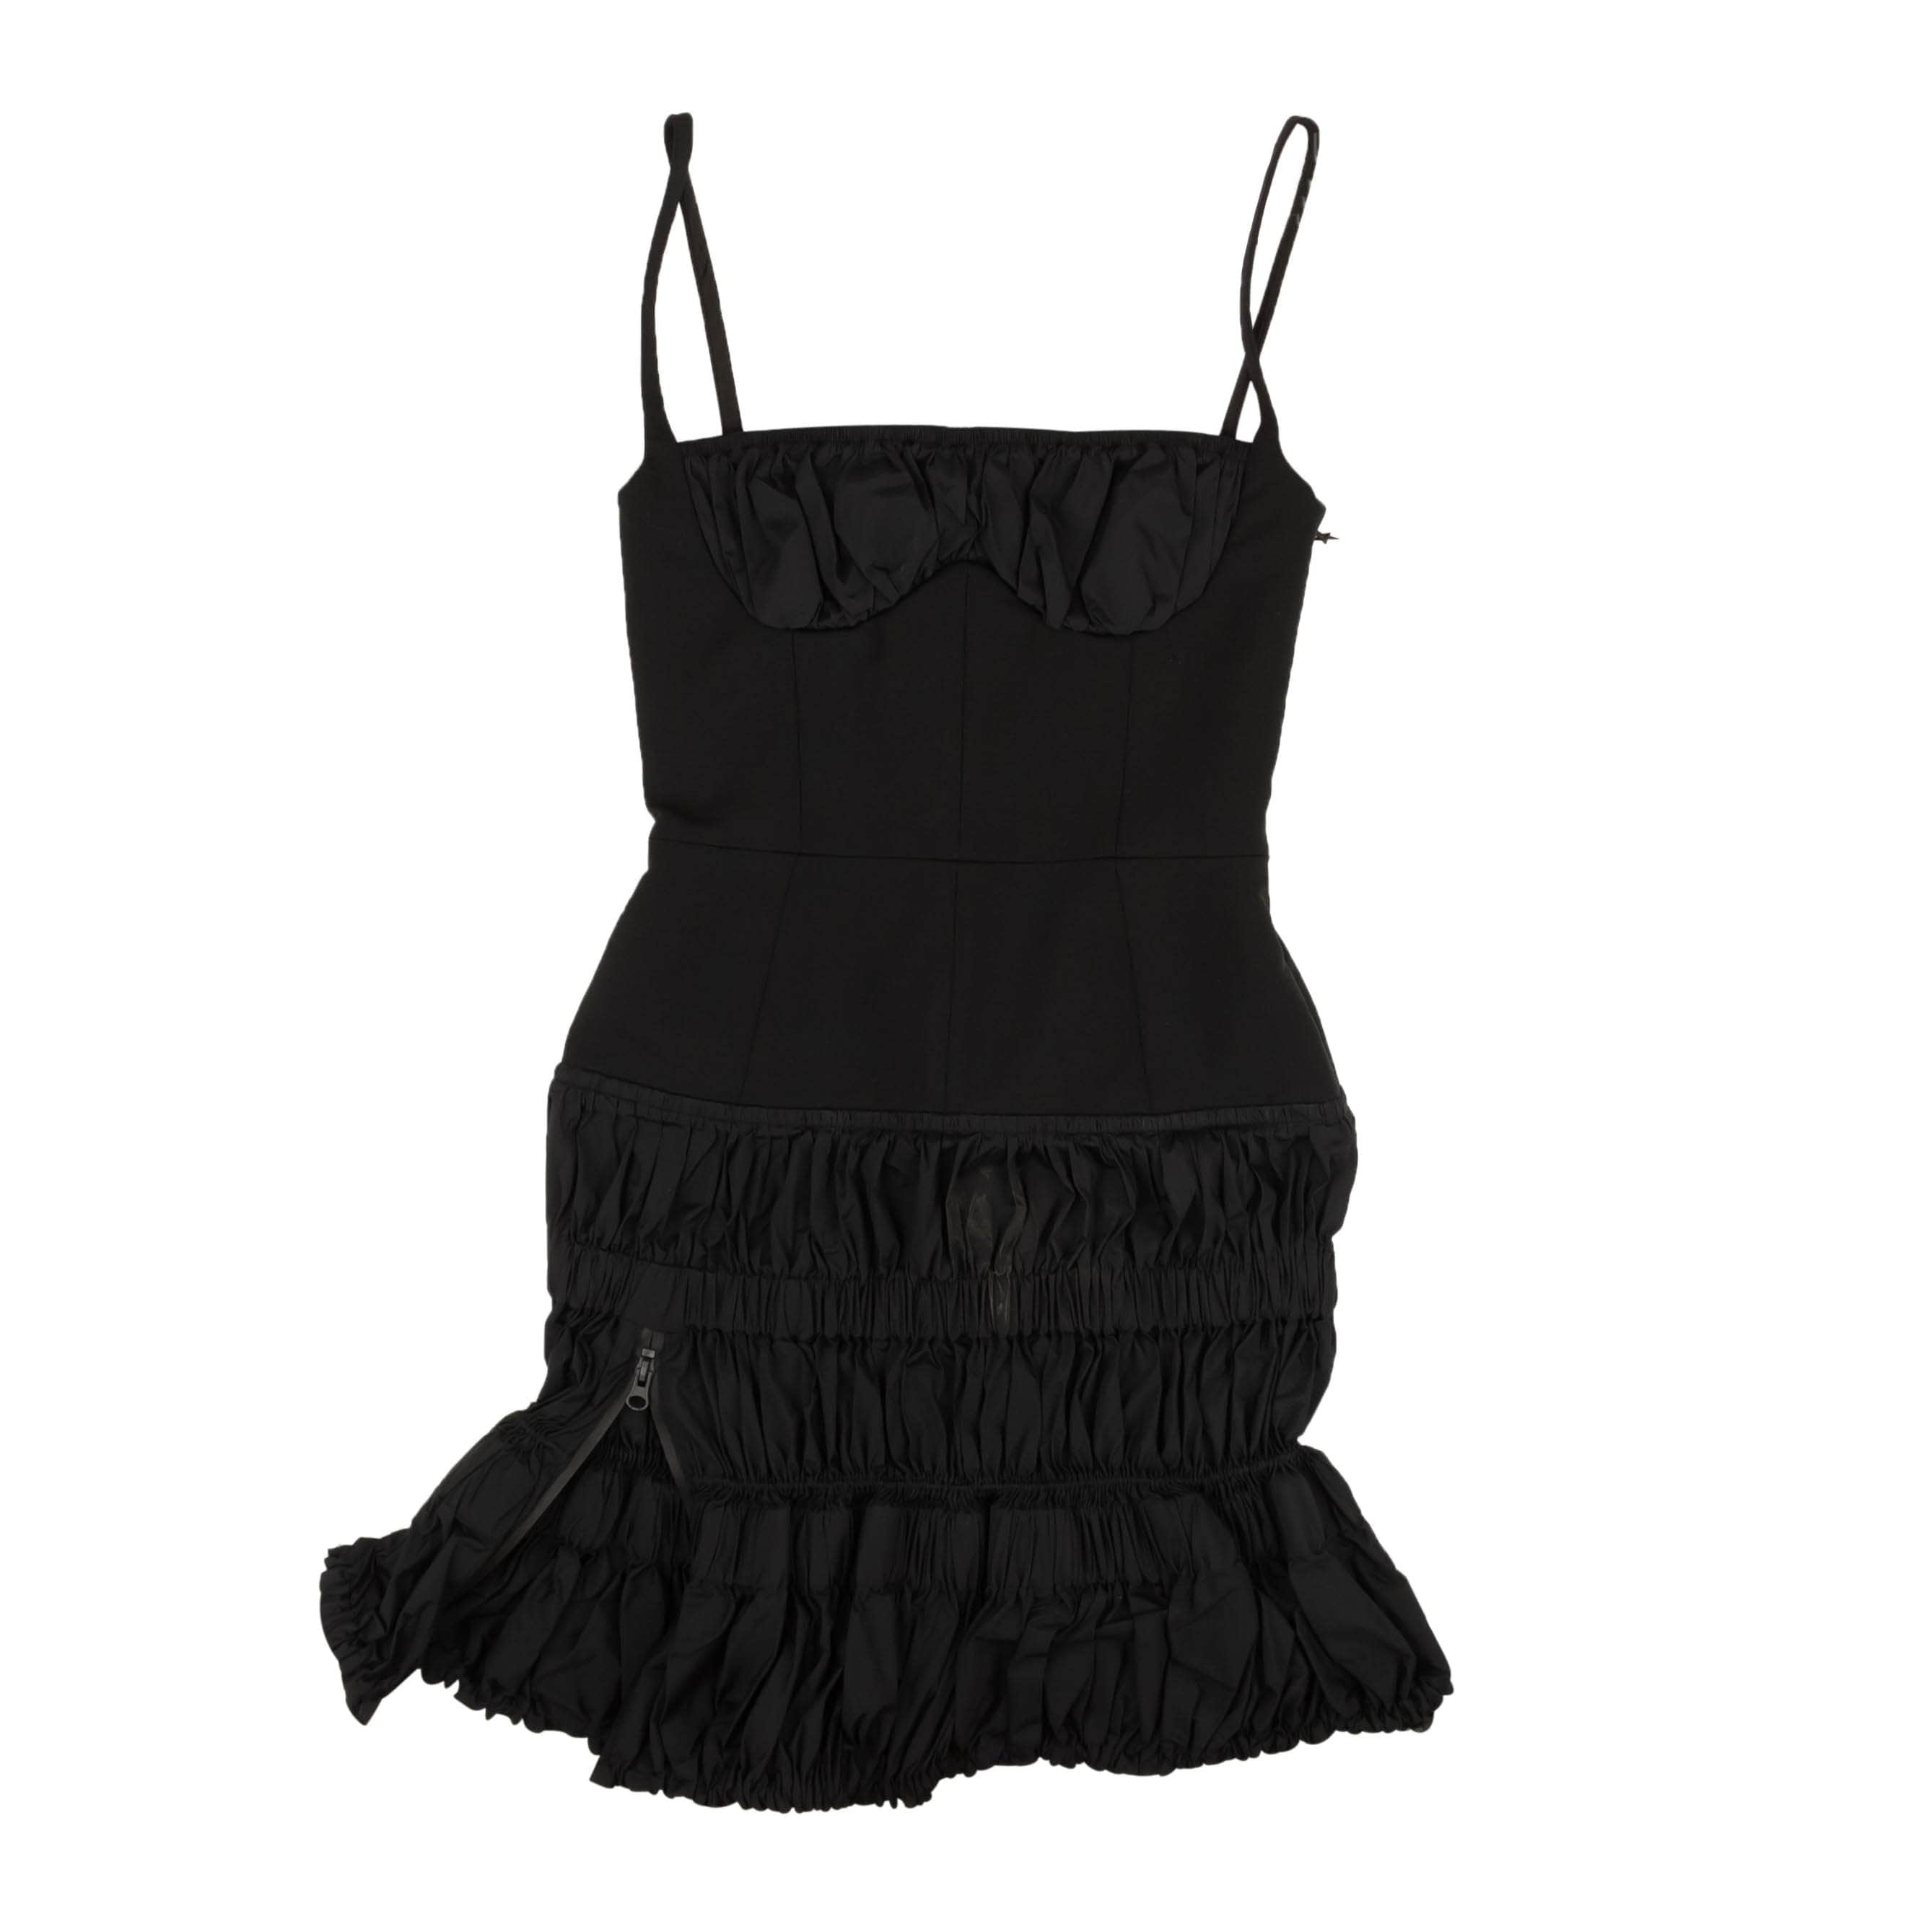 Mugler 1000-2000, channelenable-all, chicmi, couponcollection, gender-womens, main-clothing, MixedApparel, mugler, size-36, womens-day-dresses 36 Black Shirred Bustier Dress 95-MGR-0002/36 95-MGR-0002/36